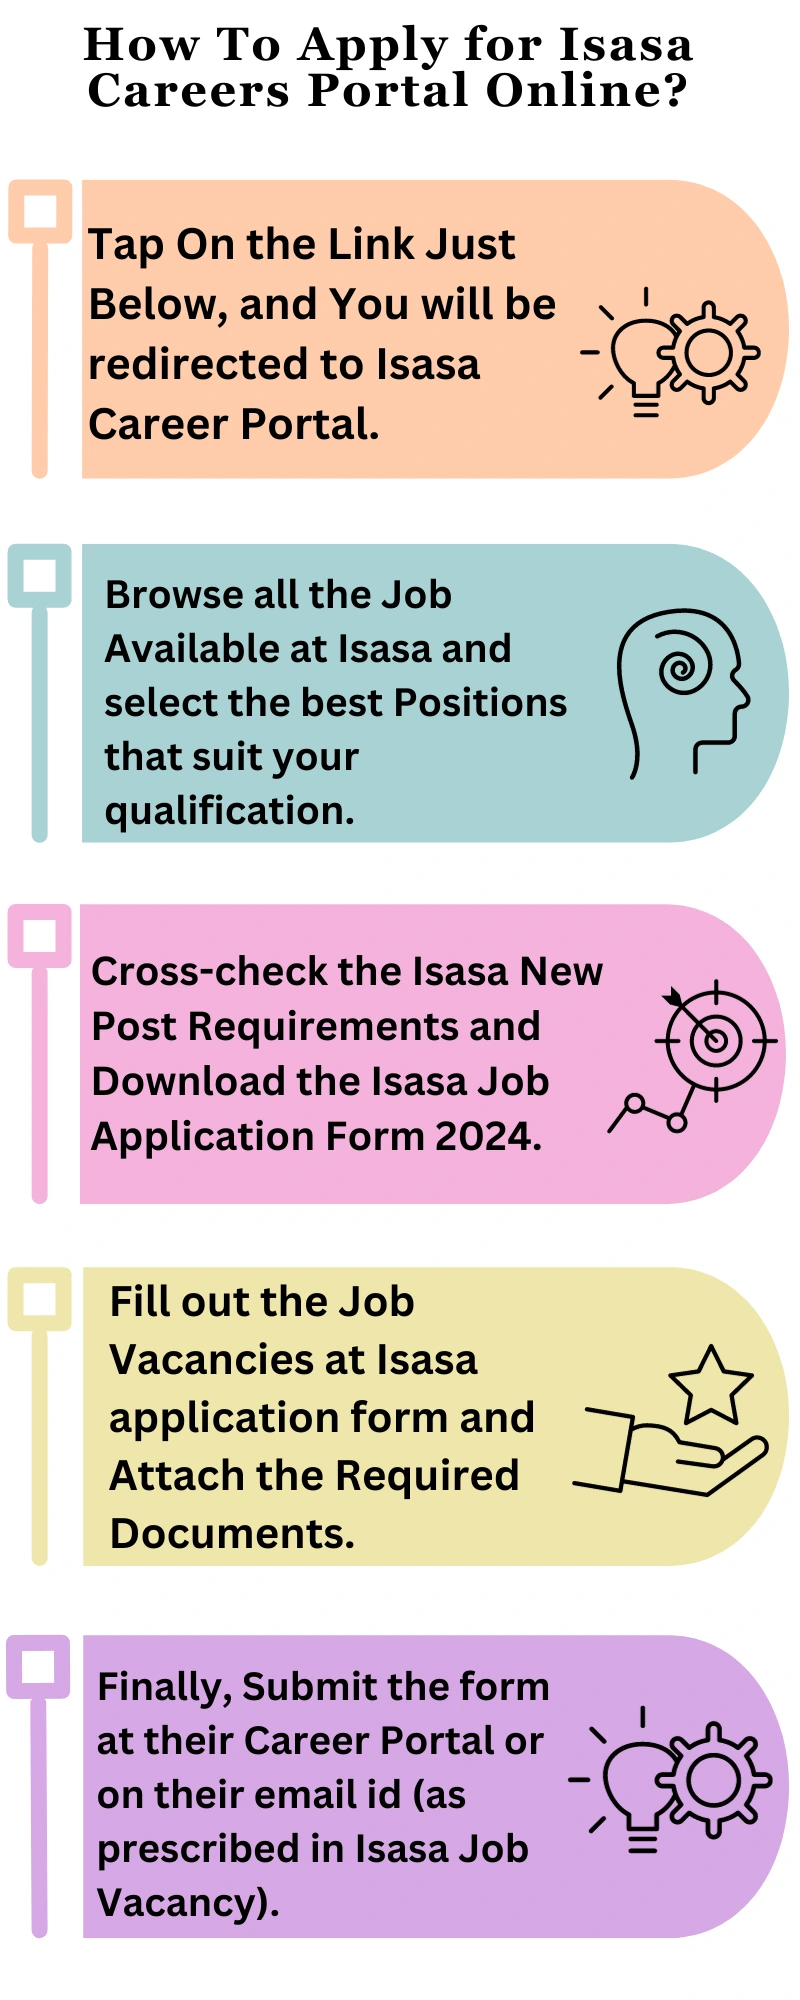 How To Apply for Isasa Careers Portal Online?